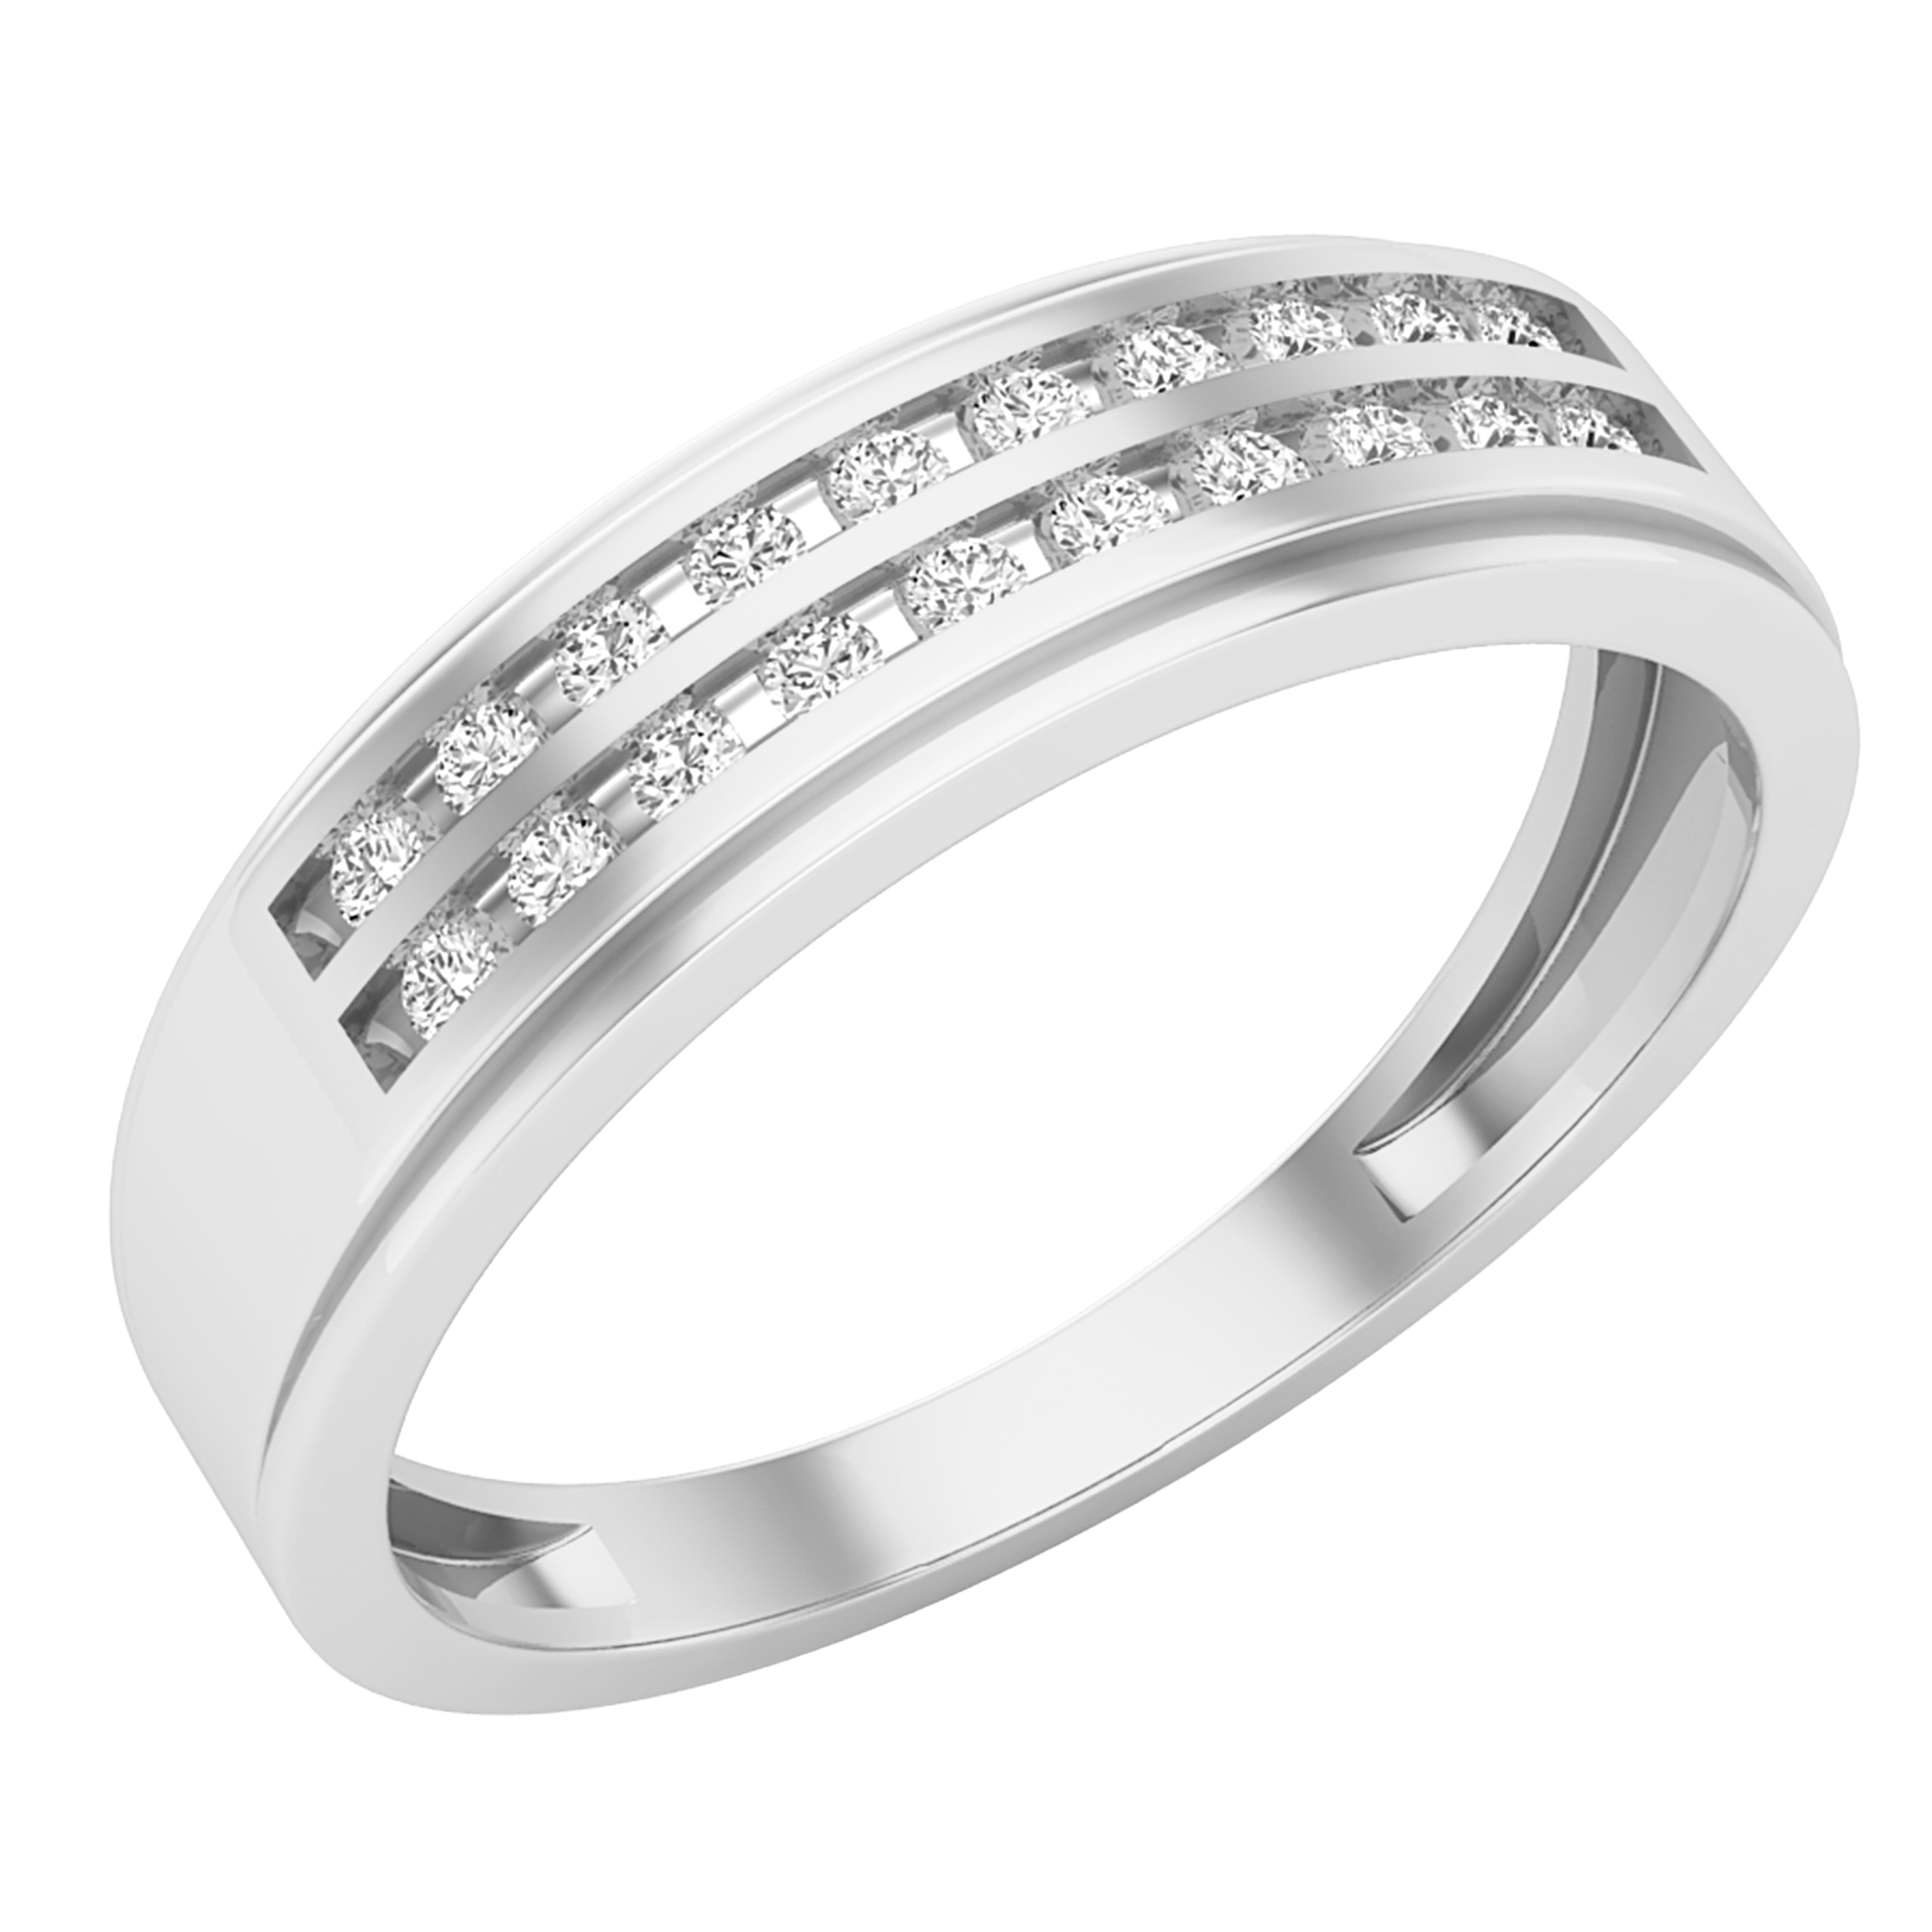 0.25 Carat (ctw) Stunning Double Row Channel Set Men's Wedding Band Ring  925 Sterling Silver